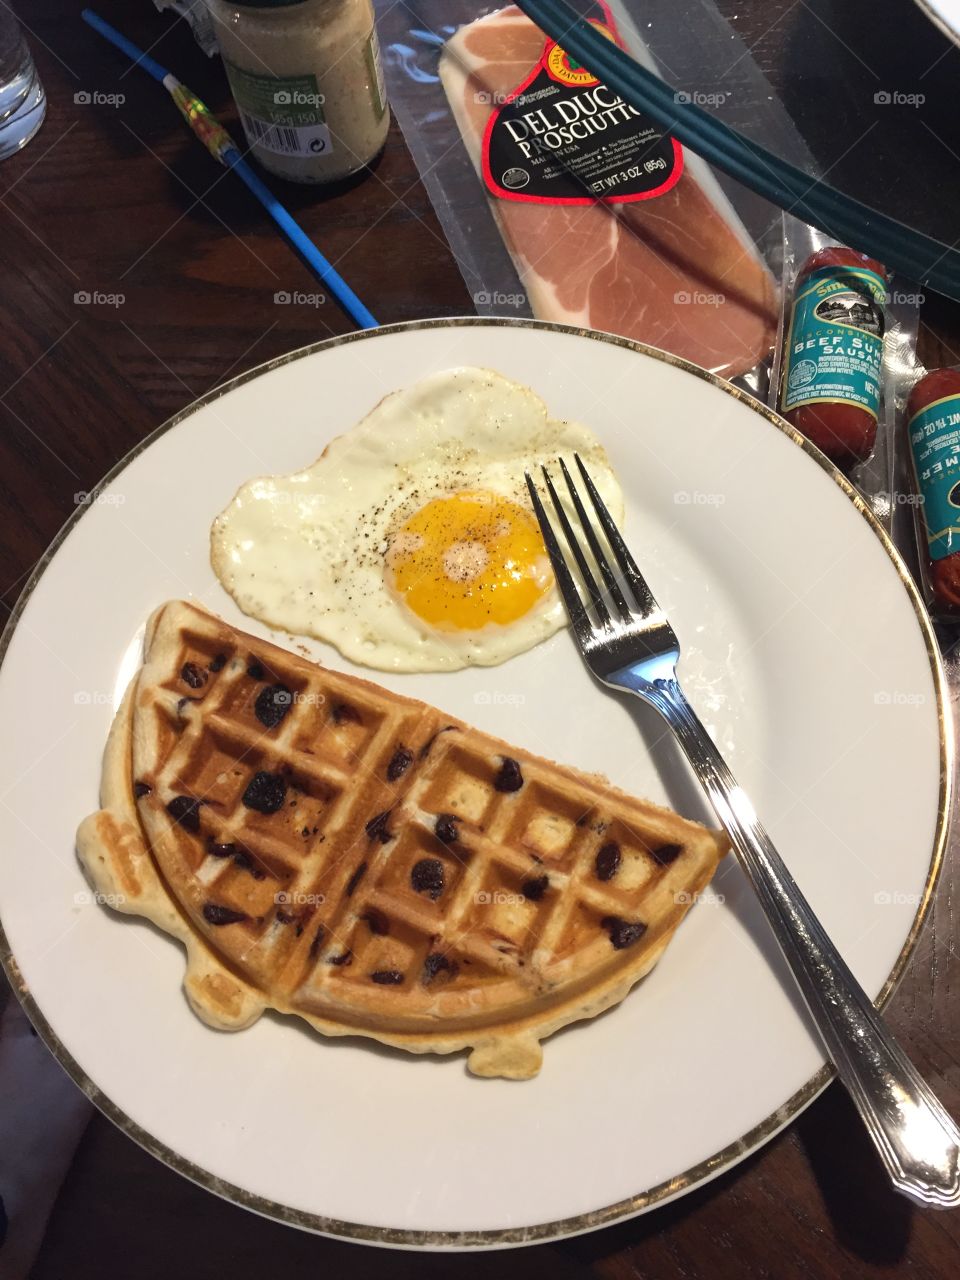 Chocolate waffle, egg, breakfast, brunch, delicious, meal, food